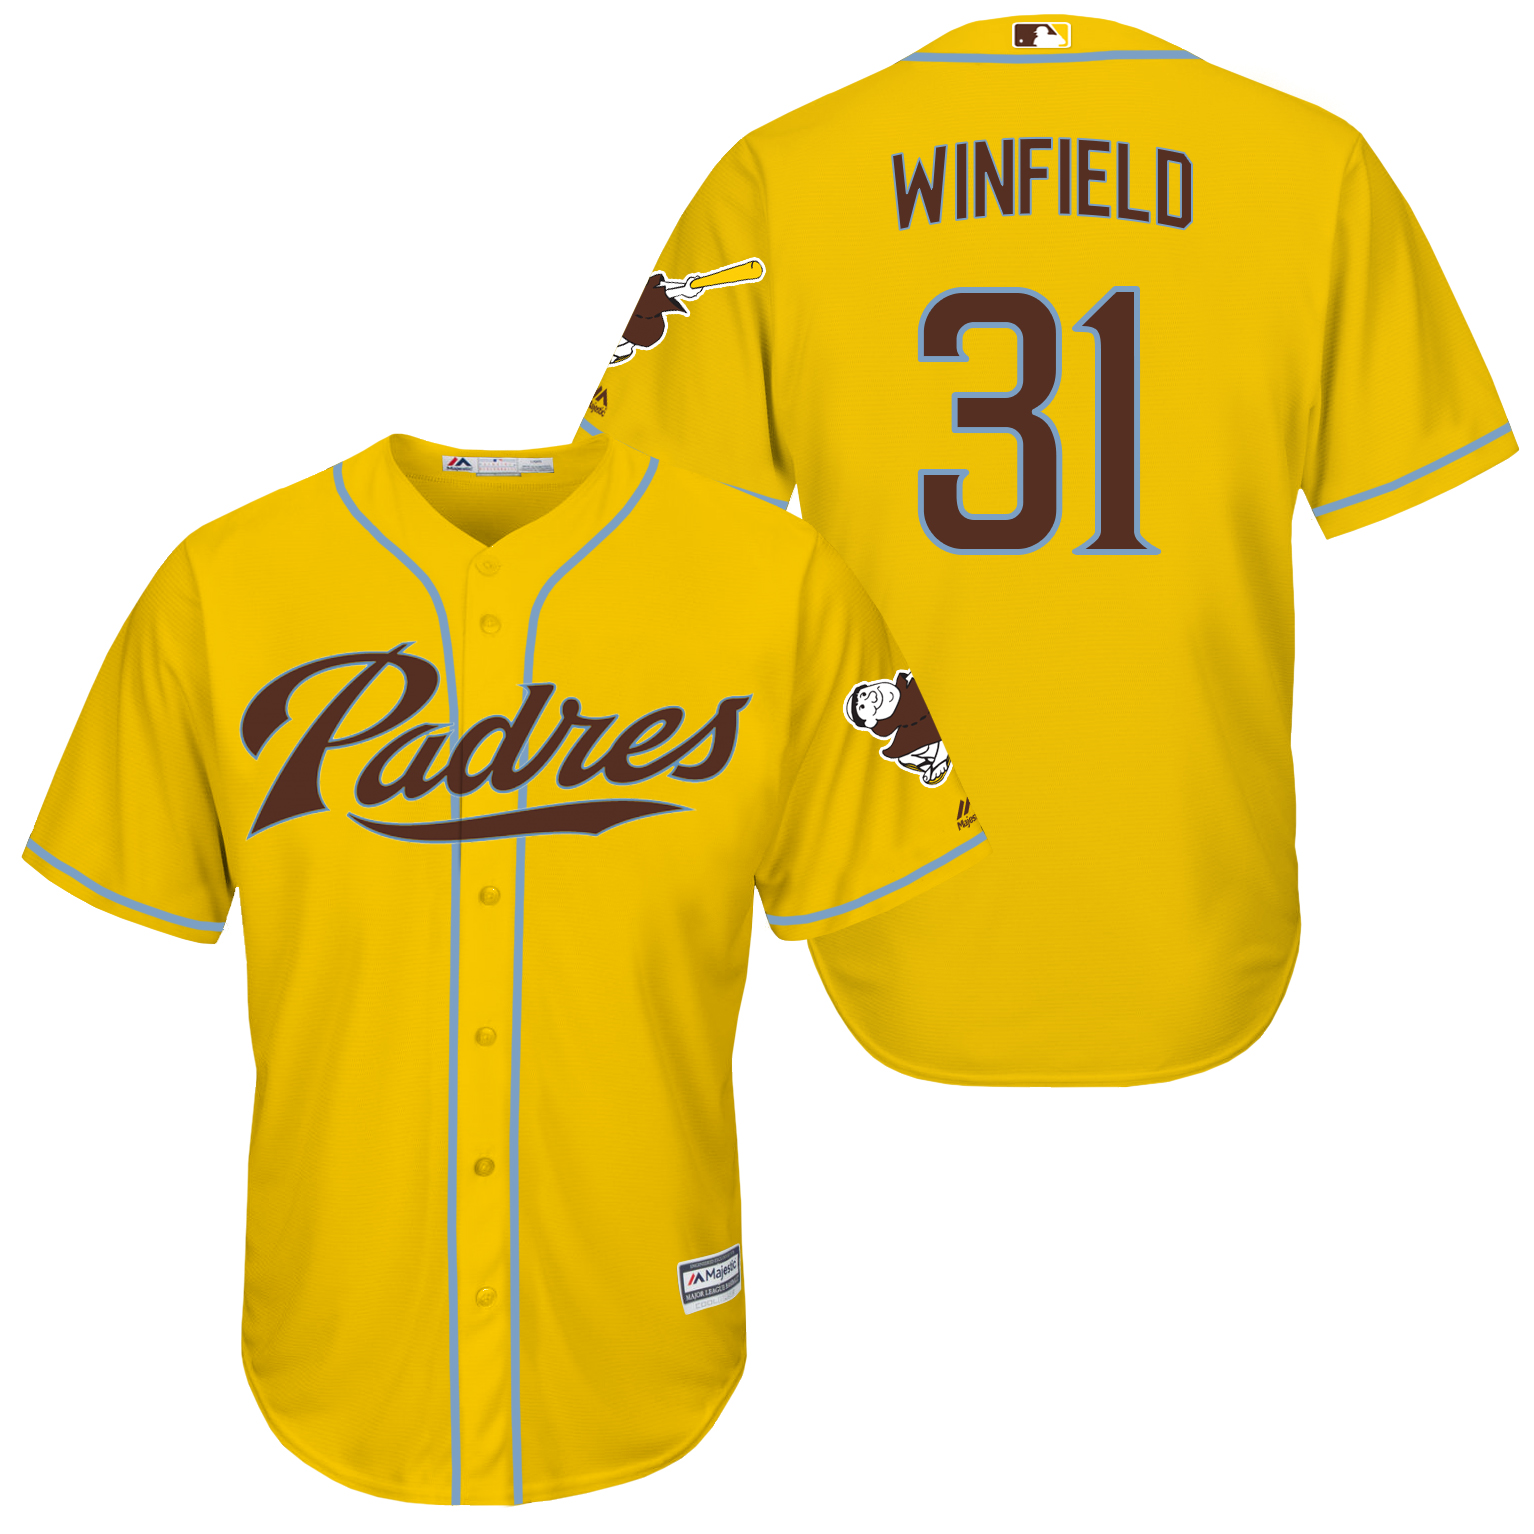 Padres 31 Dave Winfield Yellow New Cool Base Jersey